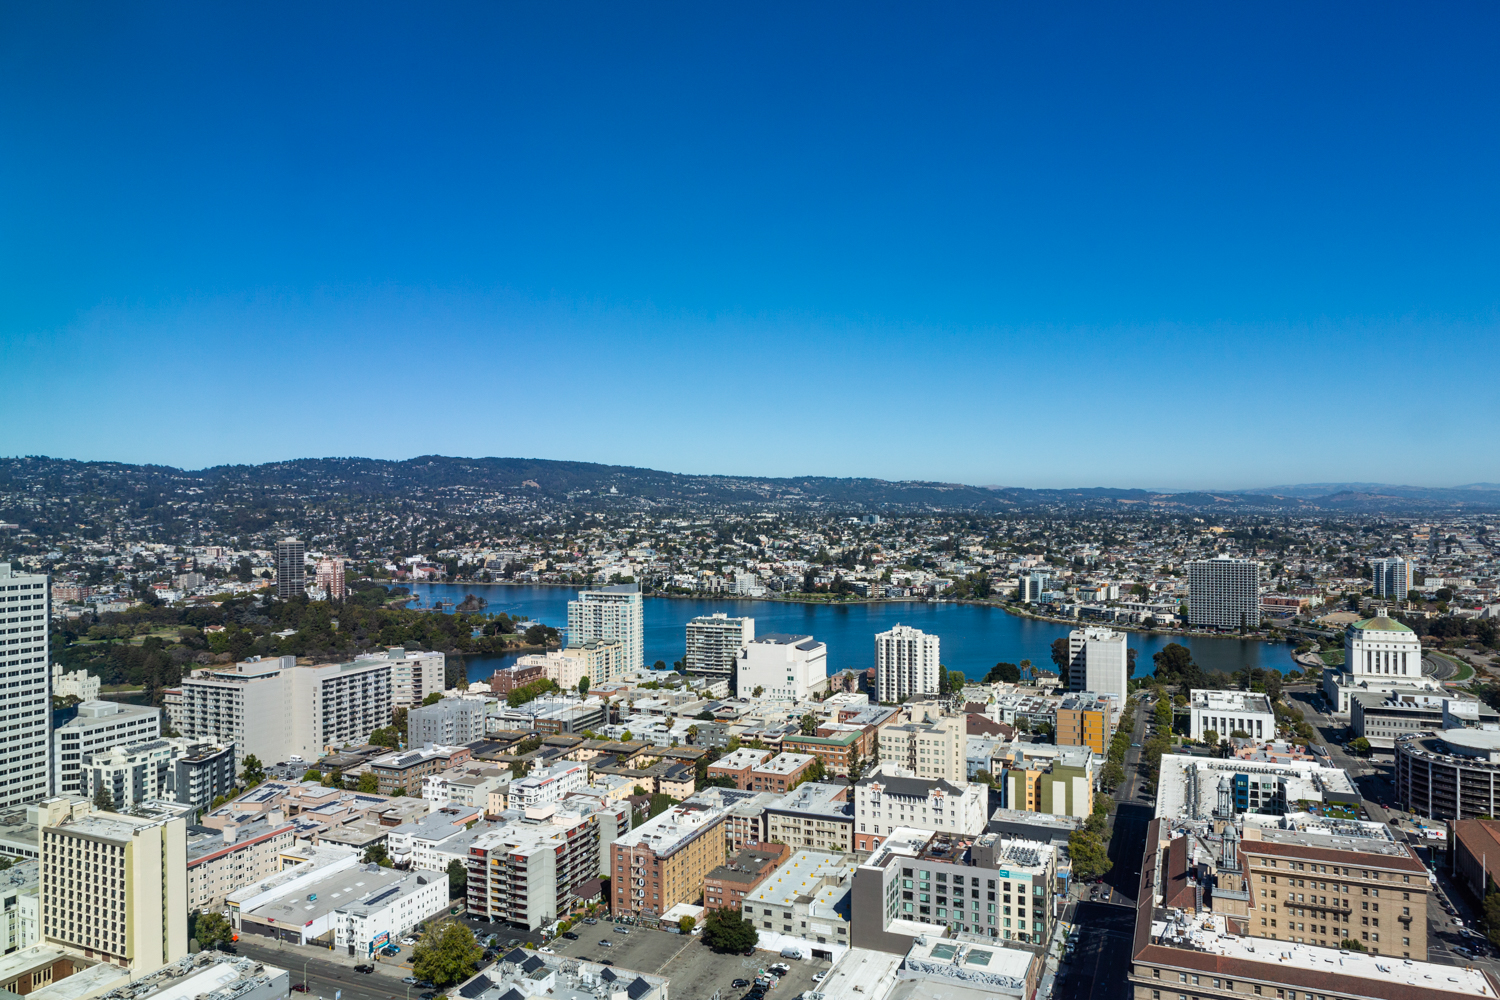 Lake Merritt from the Atlas at 385 14th Street, image by Andrew Campbell Nelson